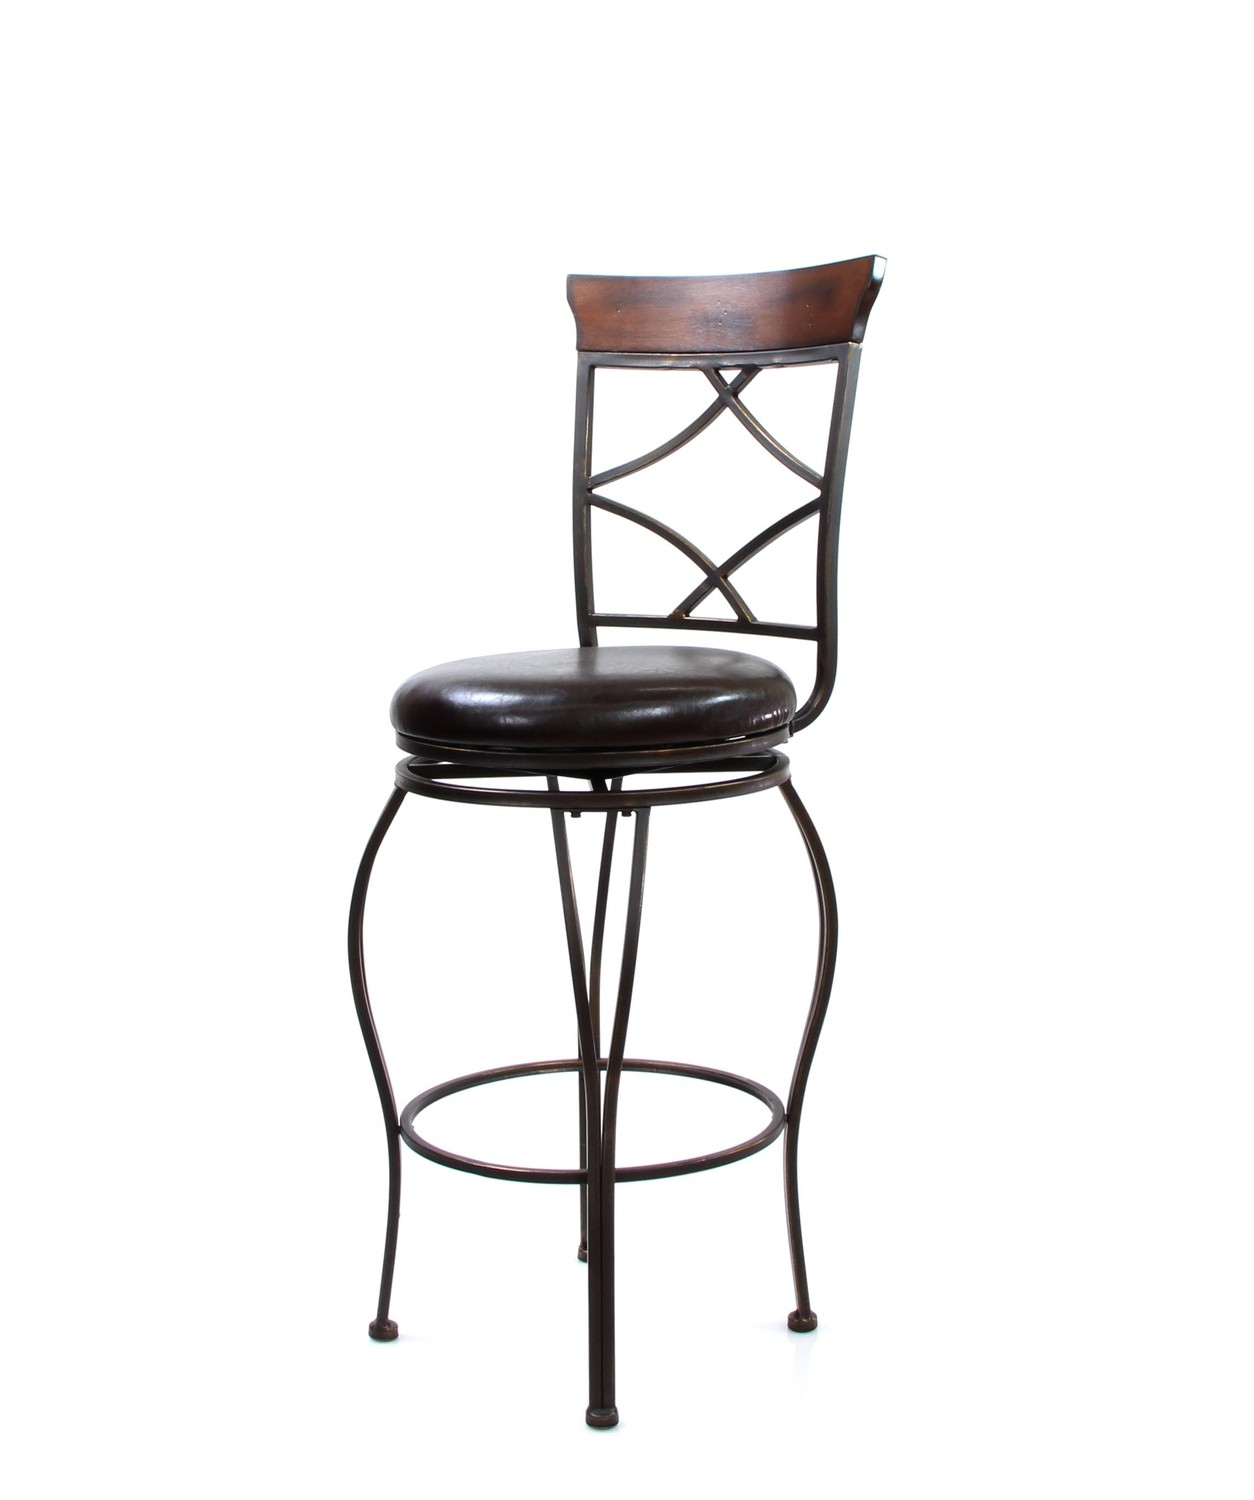 Set of 2 - 46" Antiqued Black and Cherry Finish with Espresso Faux Leather Seat Swivel Bar Chairs